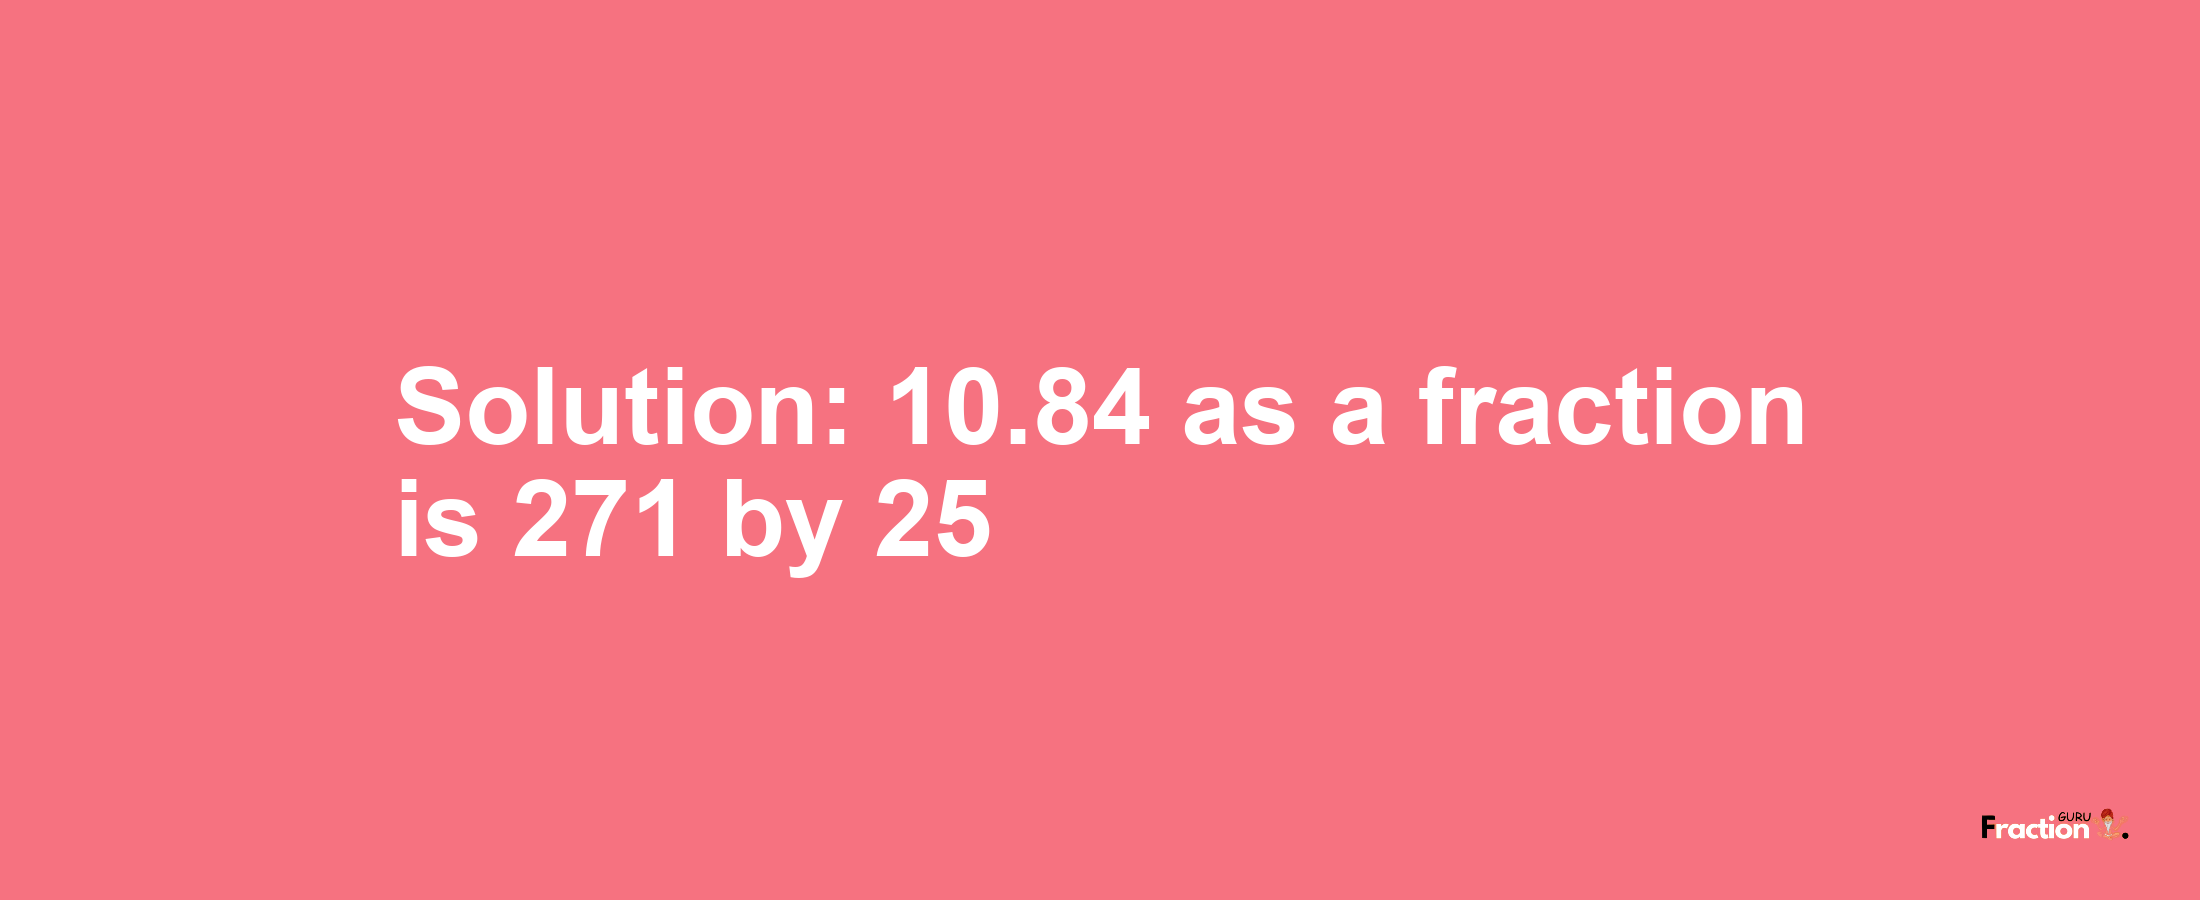 Solution:10.84 as a fraction is 271/25